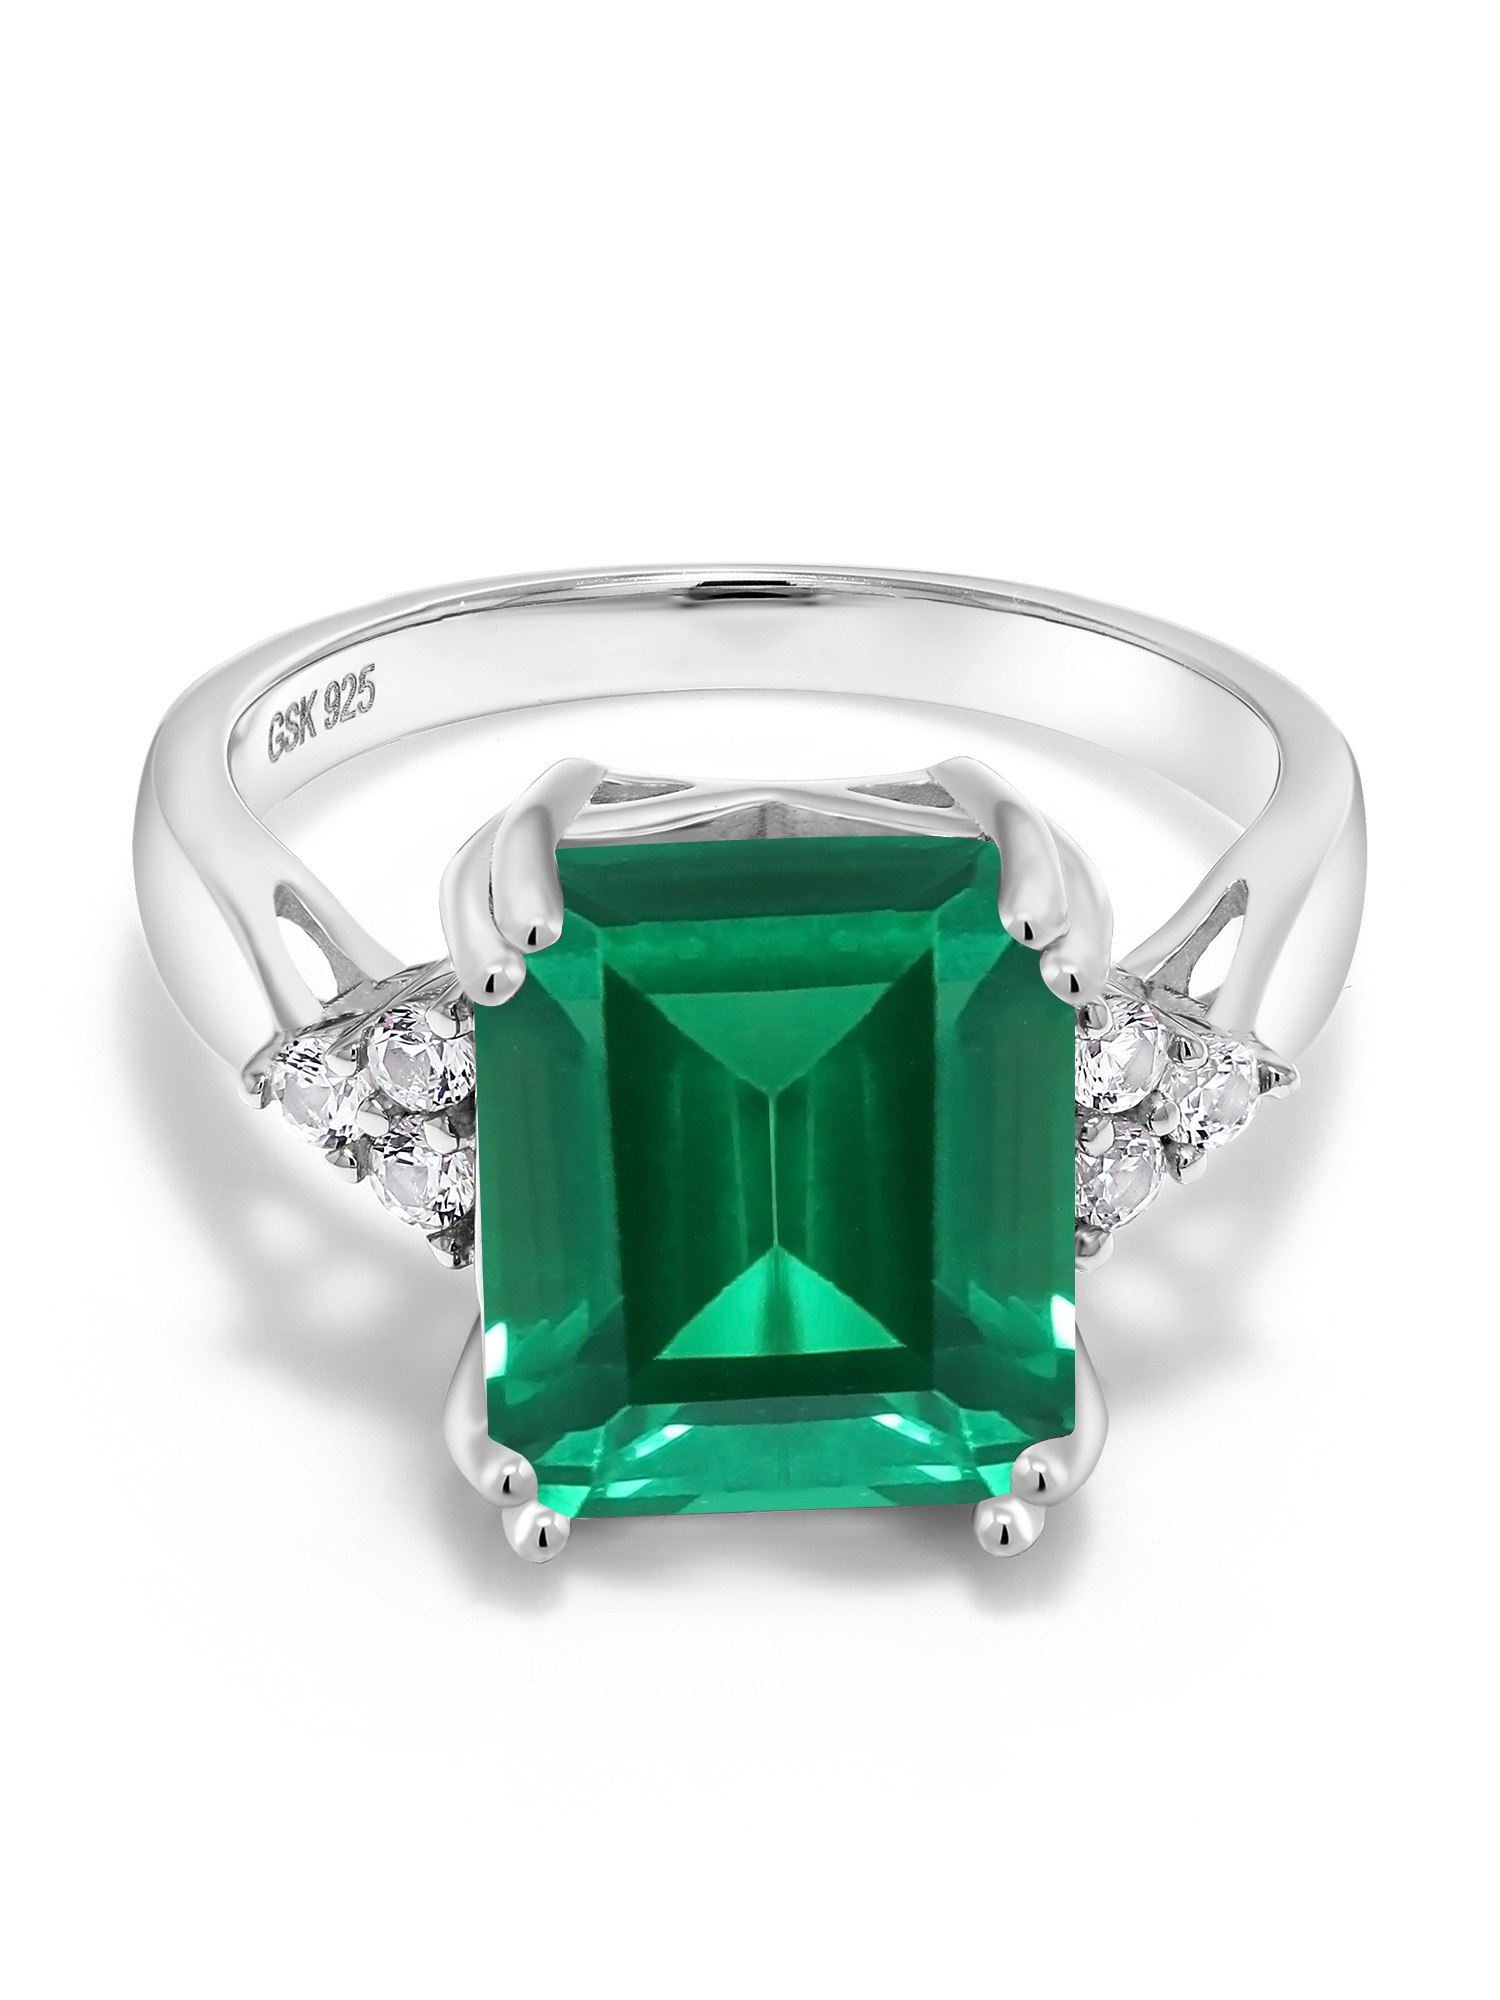 Natural Emerald Ring...925 Sterling Silver Emerald Ring...wedding Ring...6x5.5 mm Octagon Cutstone..#R133